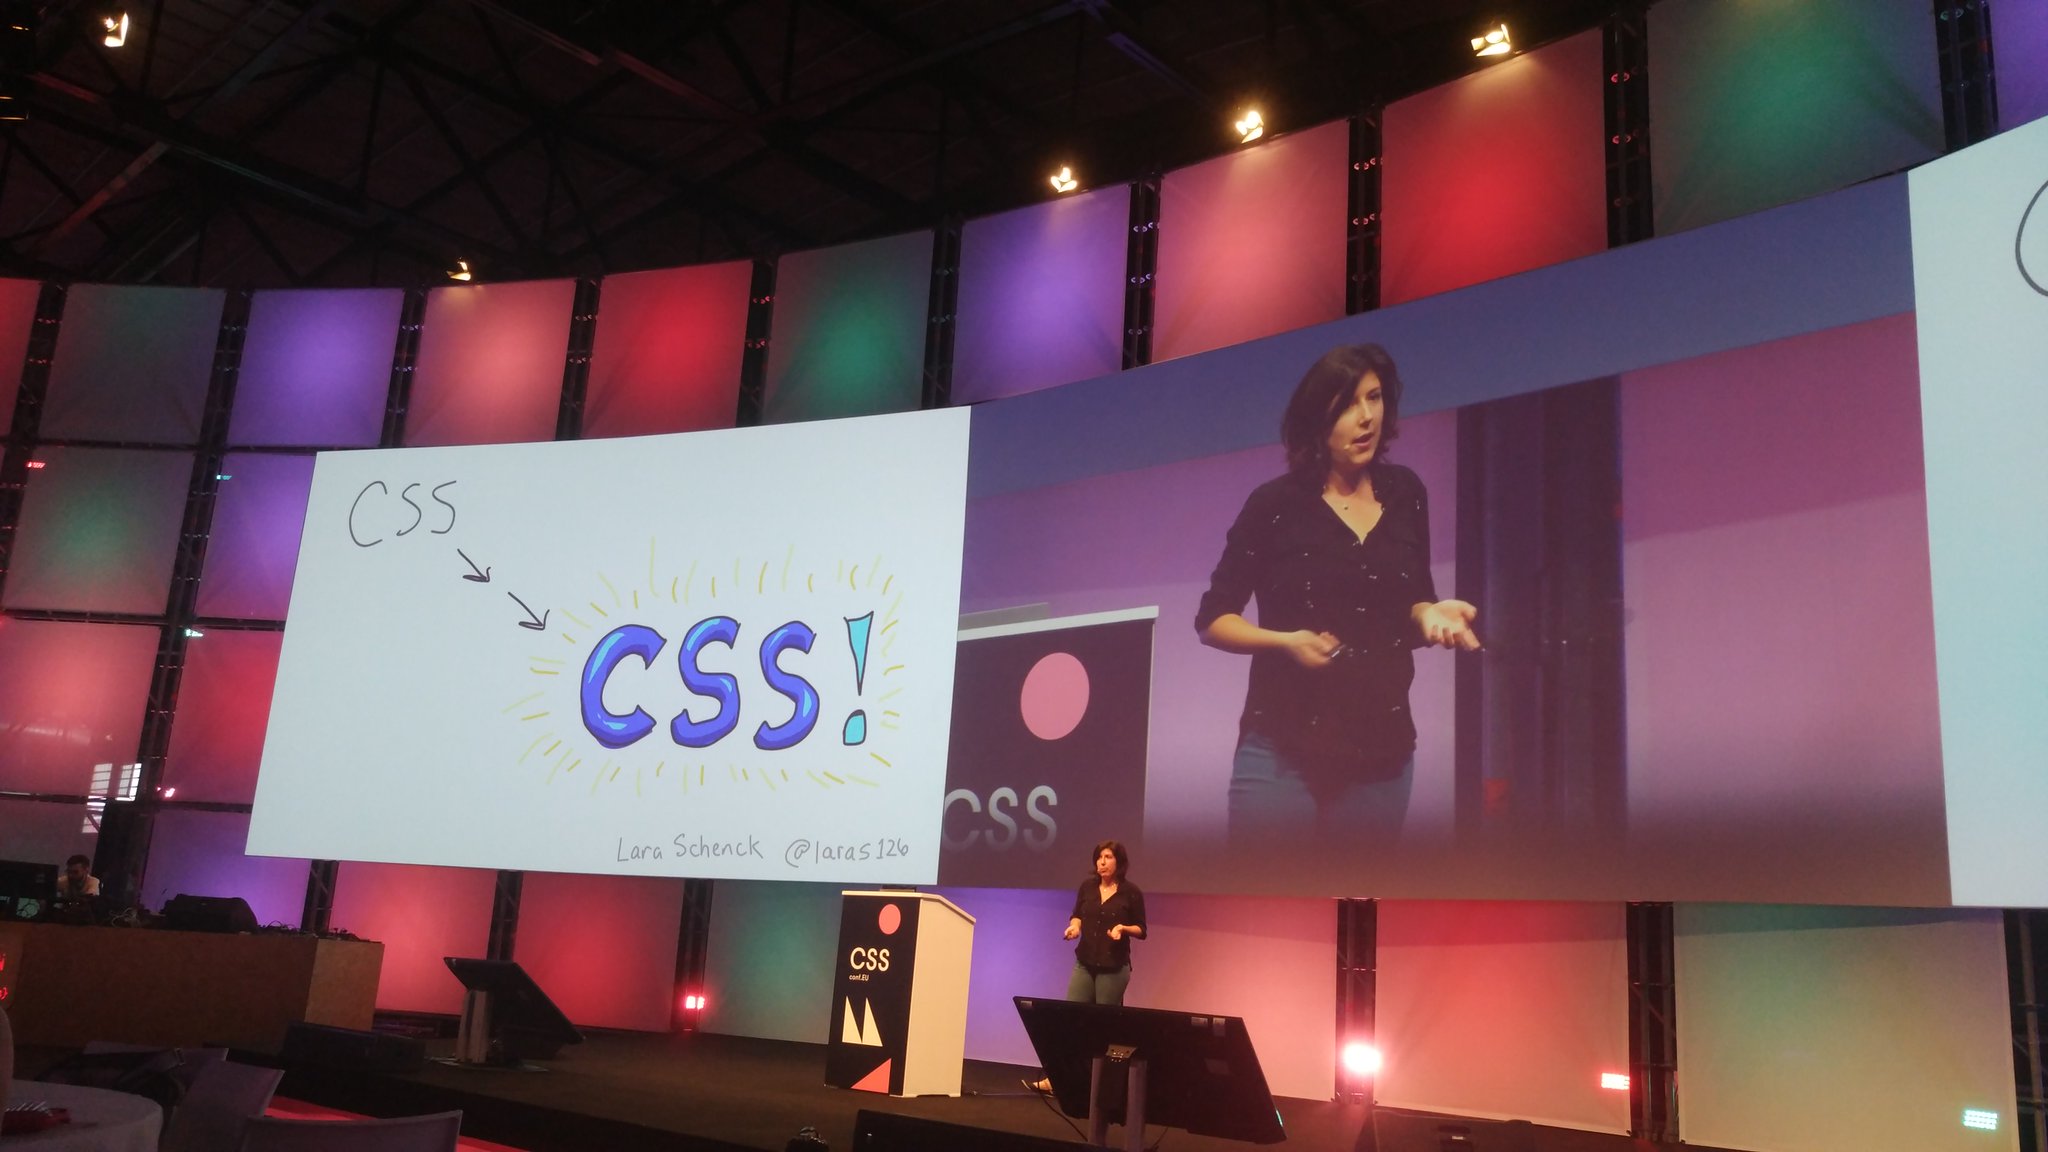 Lara speaking at a big conference about CSS!